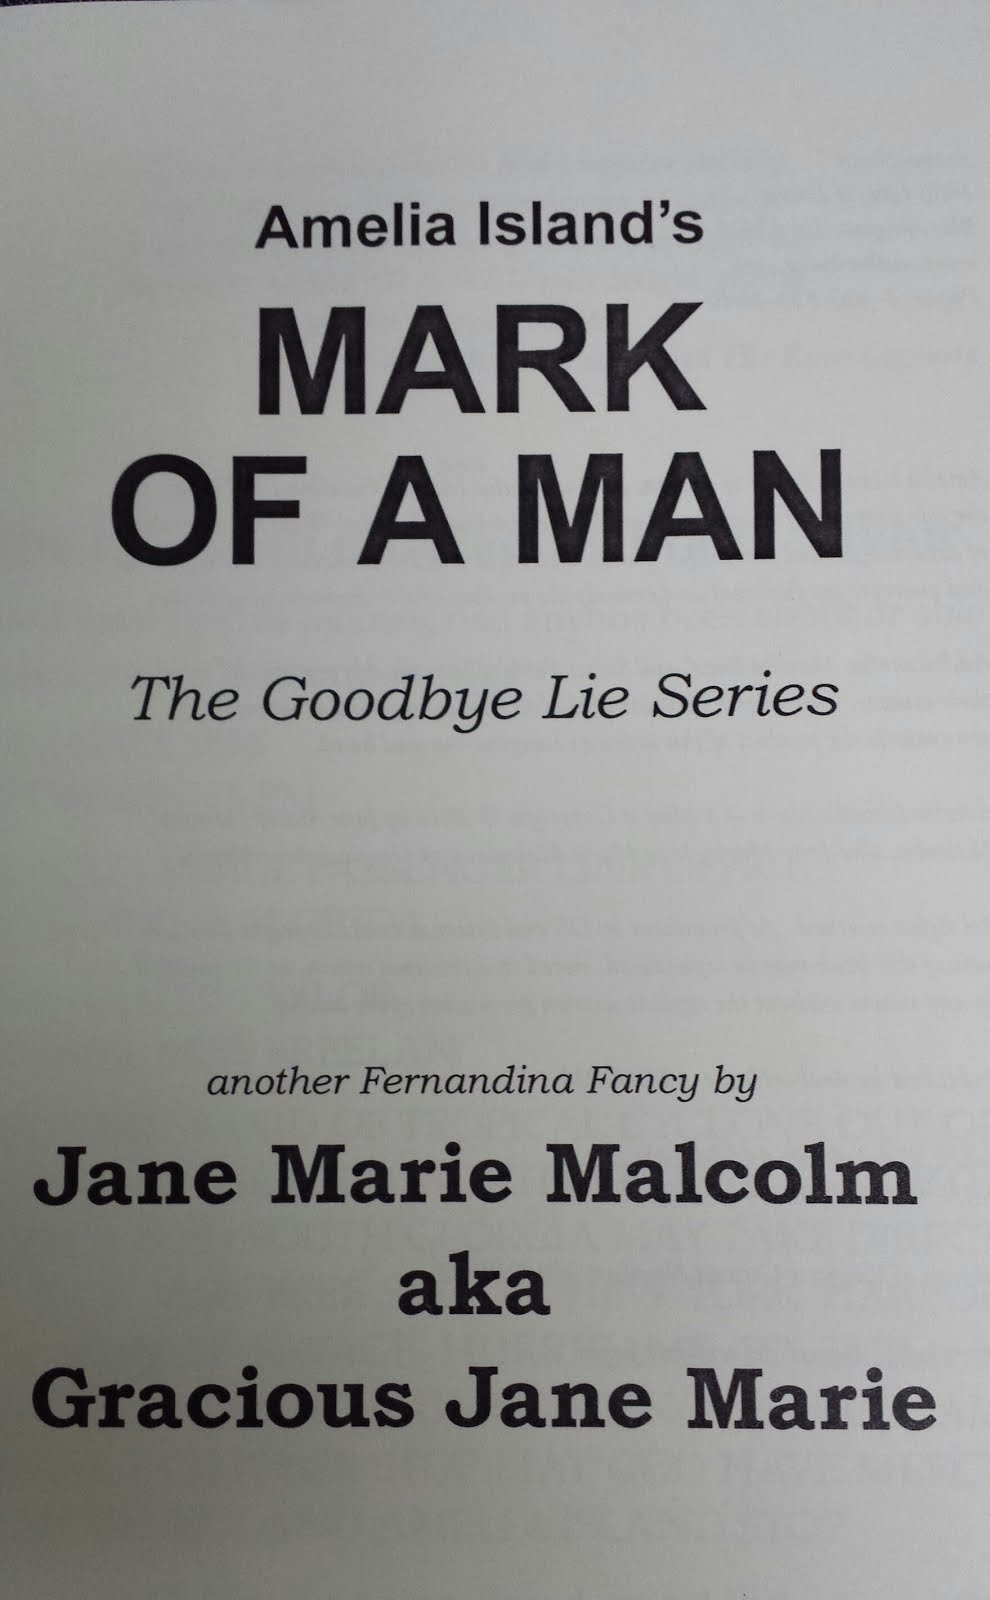 Click on the Title Page below to read the Opening Pages of Amelia Island's Mark of a Man